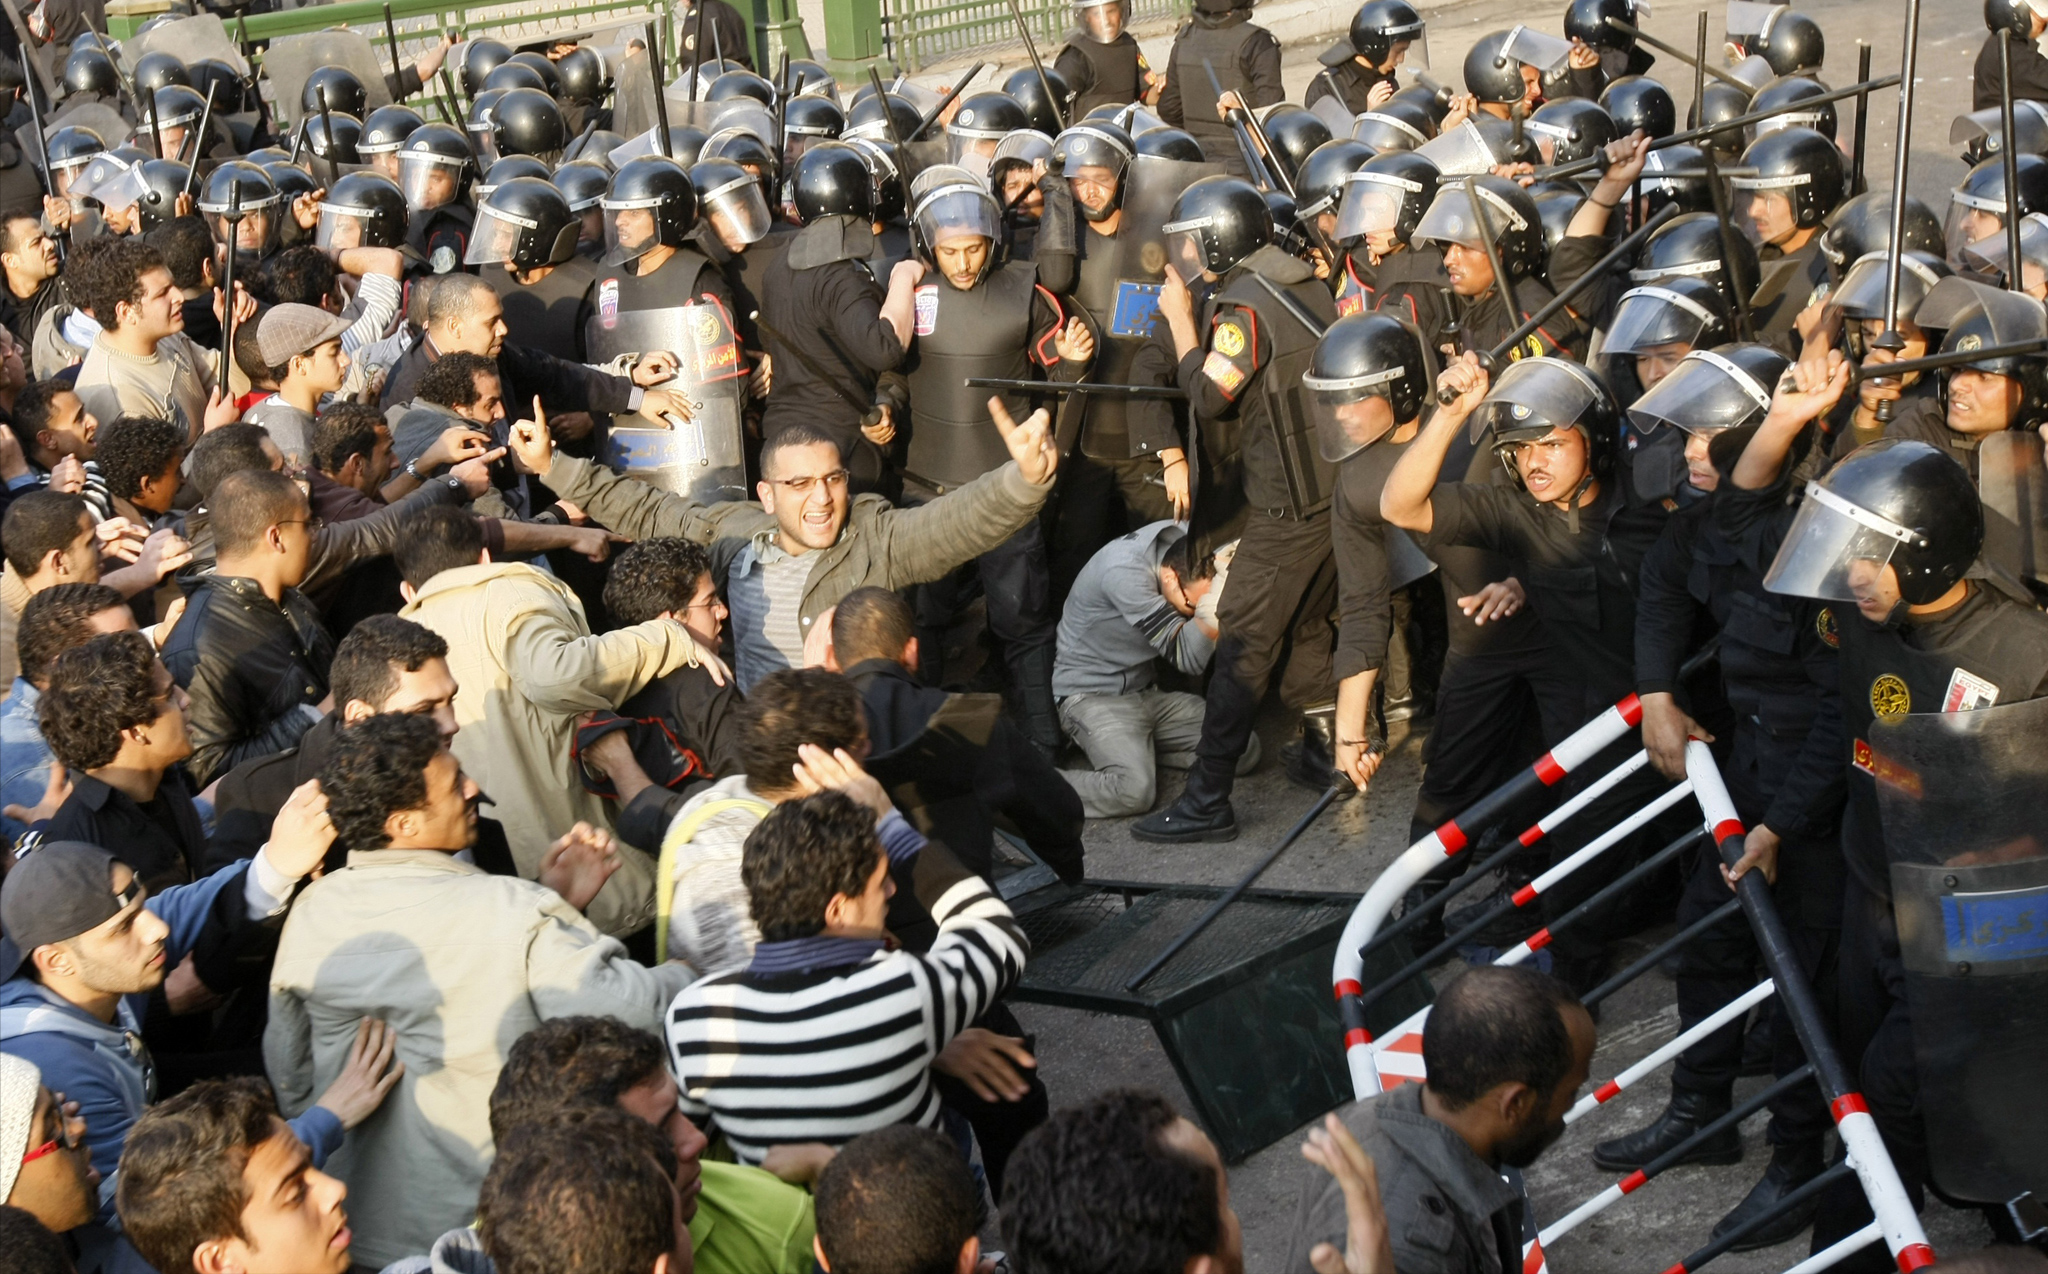 Inspired by the Tunisian revolution, several thousand Egyptian protesters took to the streets to vent their anger at the country's brutal authorities on January 25, 2011. <br>
The demonstrations were a breakthrough for Egypt, a police state at the time. (Photo credit: AFP)